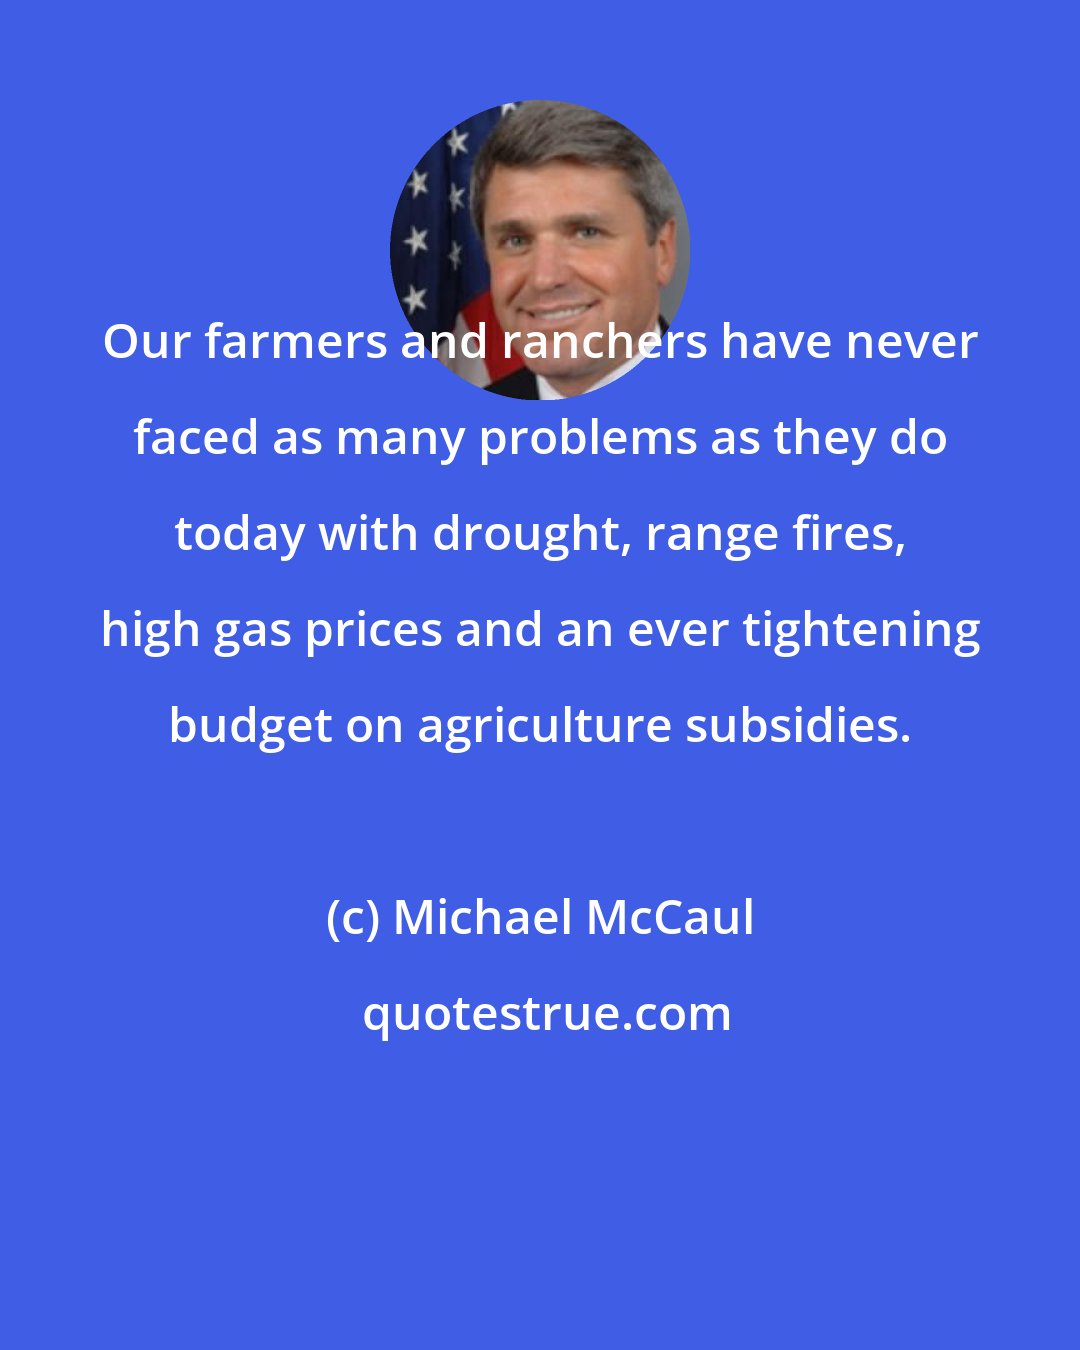 Michael McCaul: Our farmers and ranchers have never faced as many problems as they do today with drought, range fires, high gas prices and an ever tightening budget on agriculture subsidies.